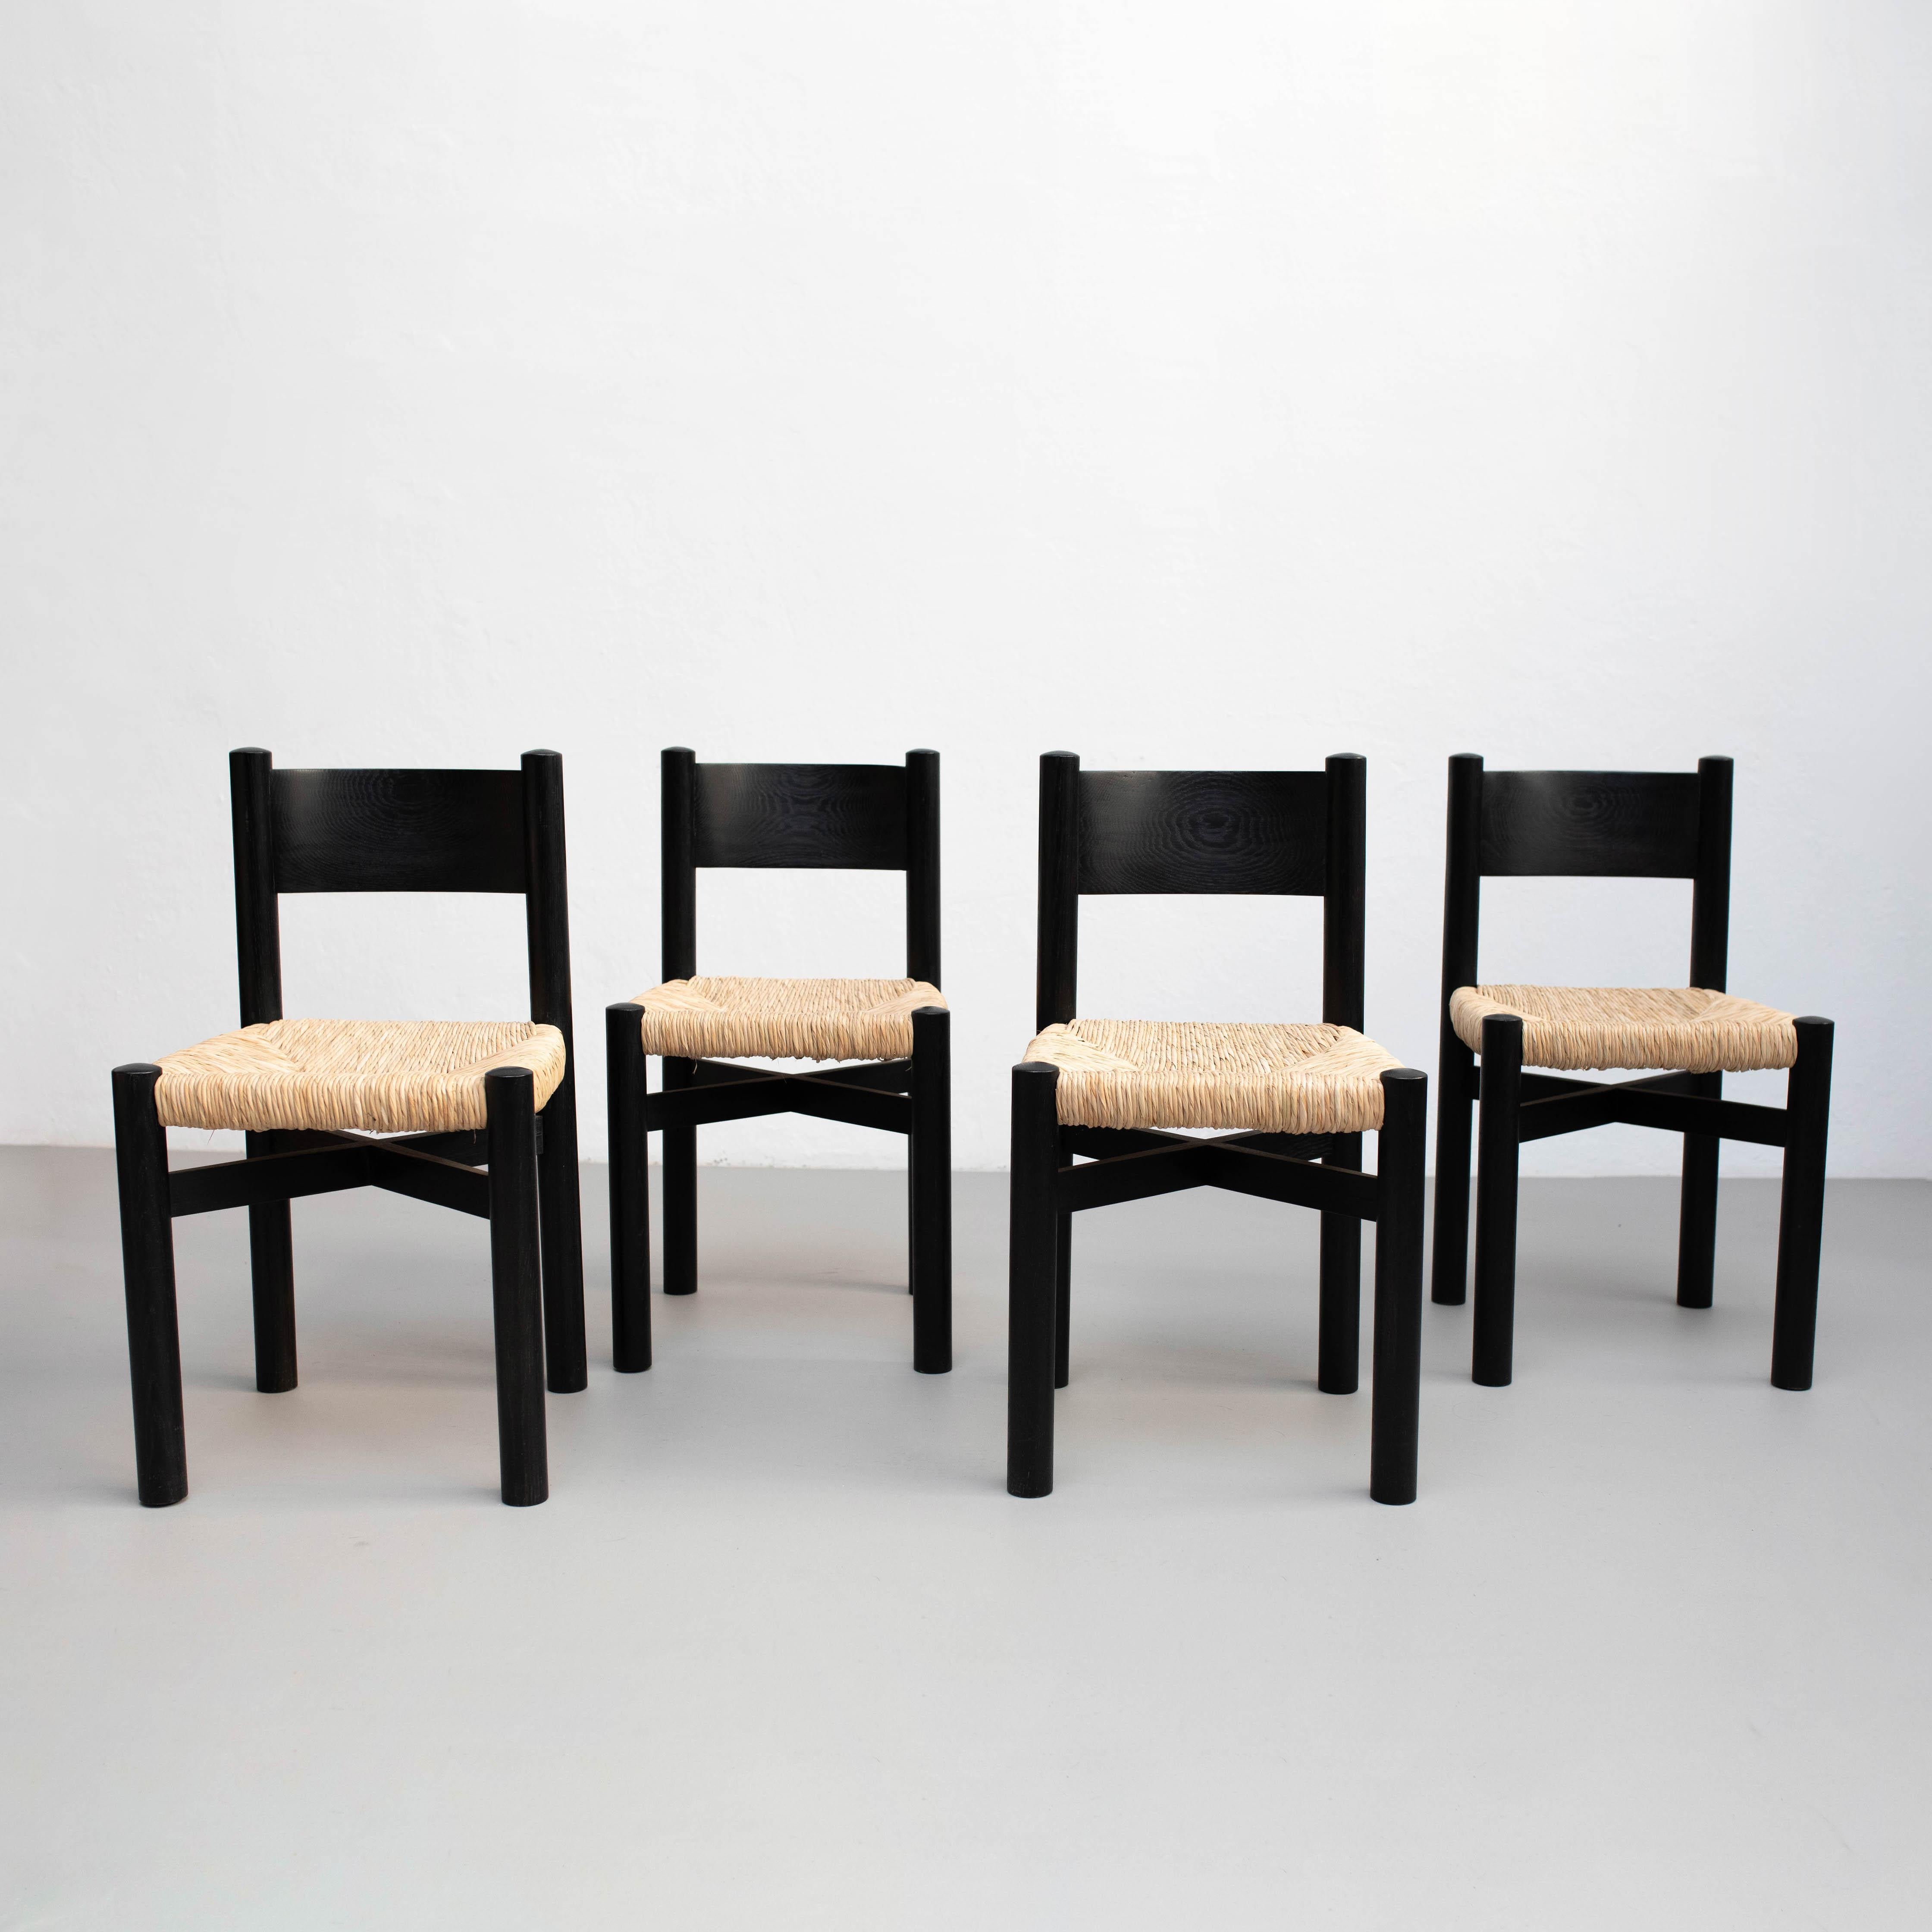 Set of four wood and rattan chairs after Charlotte Perriand, circa 1980.

Unknow manufacturer.

In good original condition, with minor wear consistent with age and use, preserving a beautiful patina.

Materials:
Wood
Rattan

Cane has been